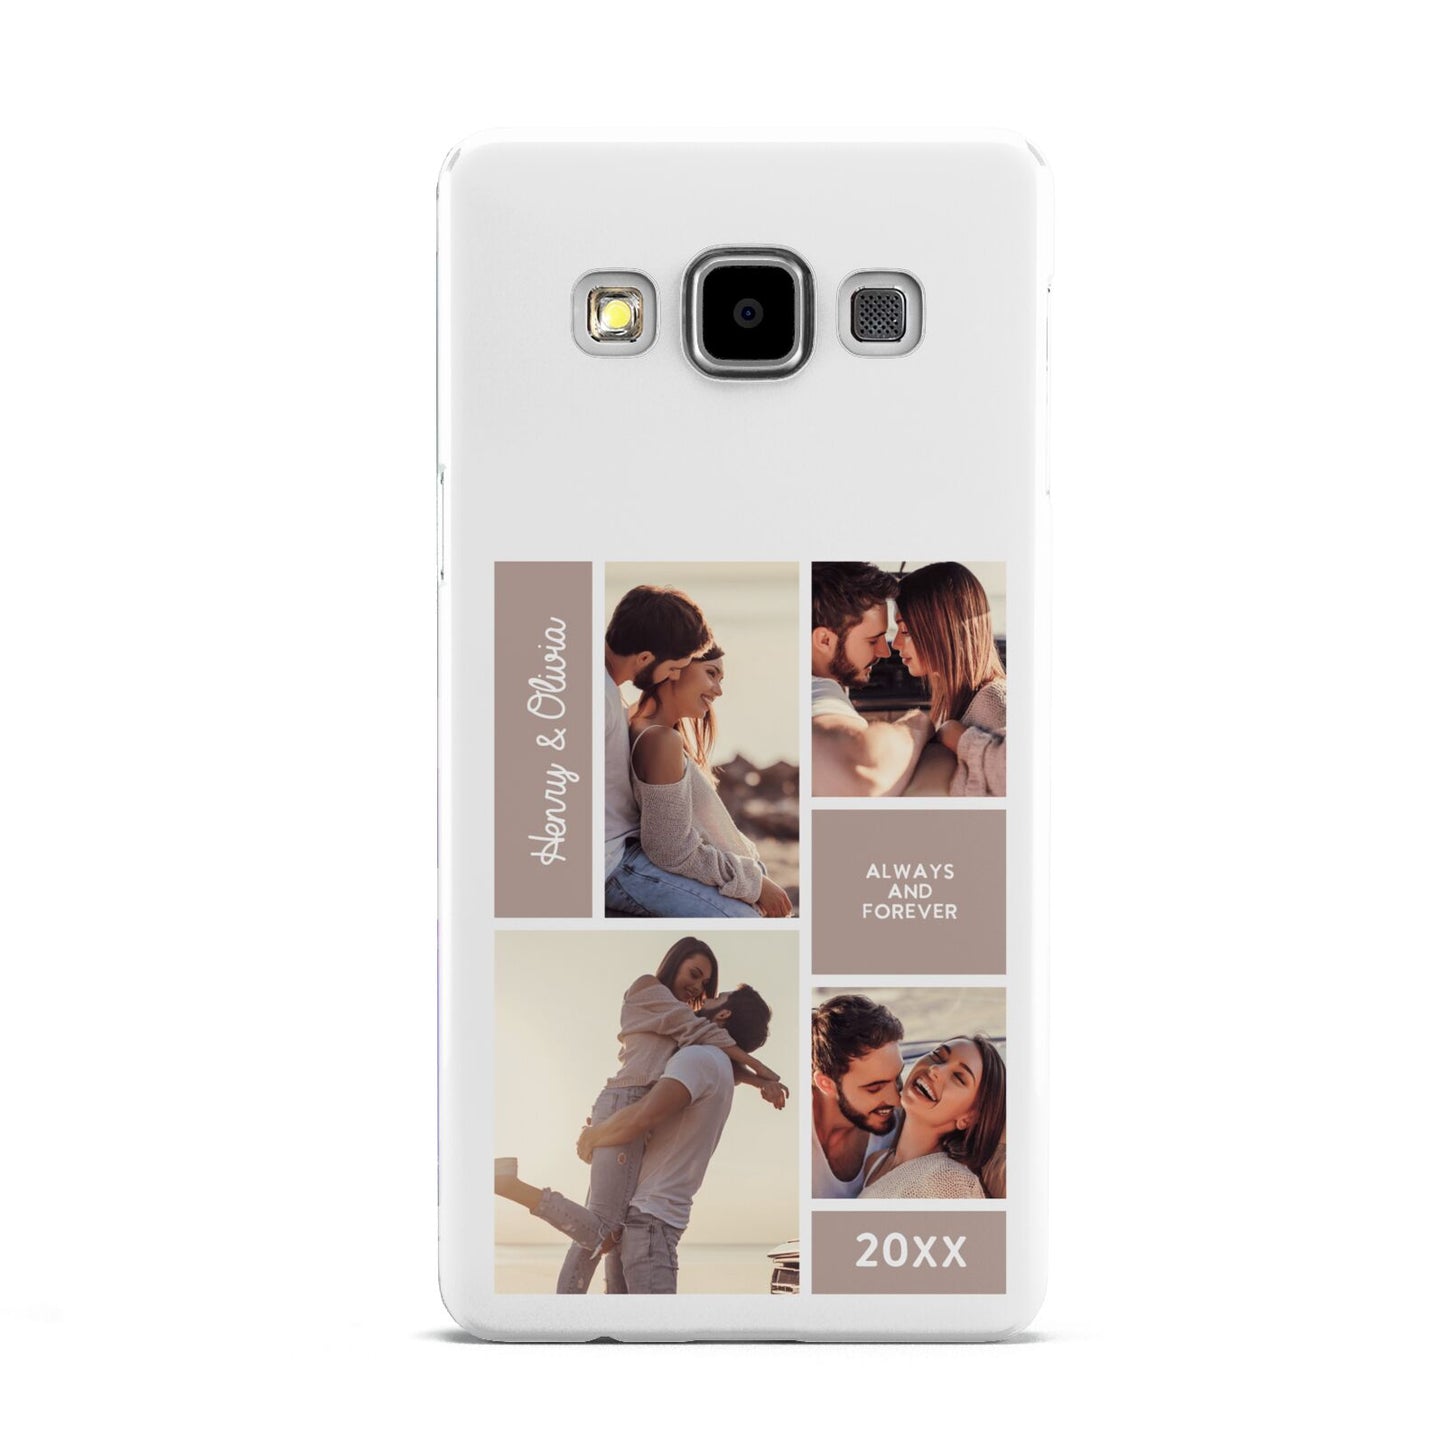 Couples Valentine Photo Collage Personalised Samsung Galaxy A5 Case